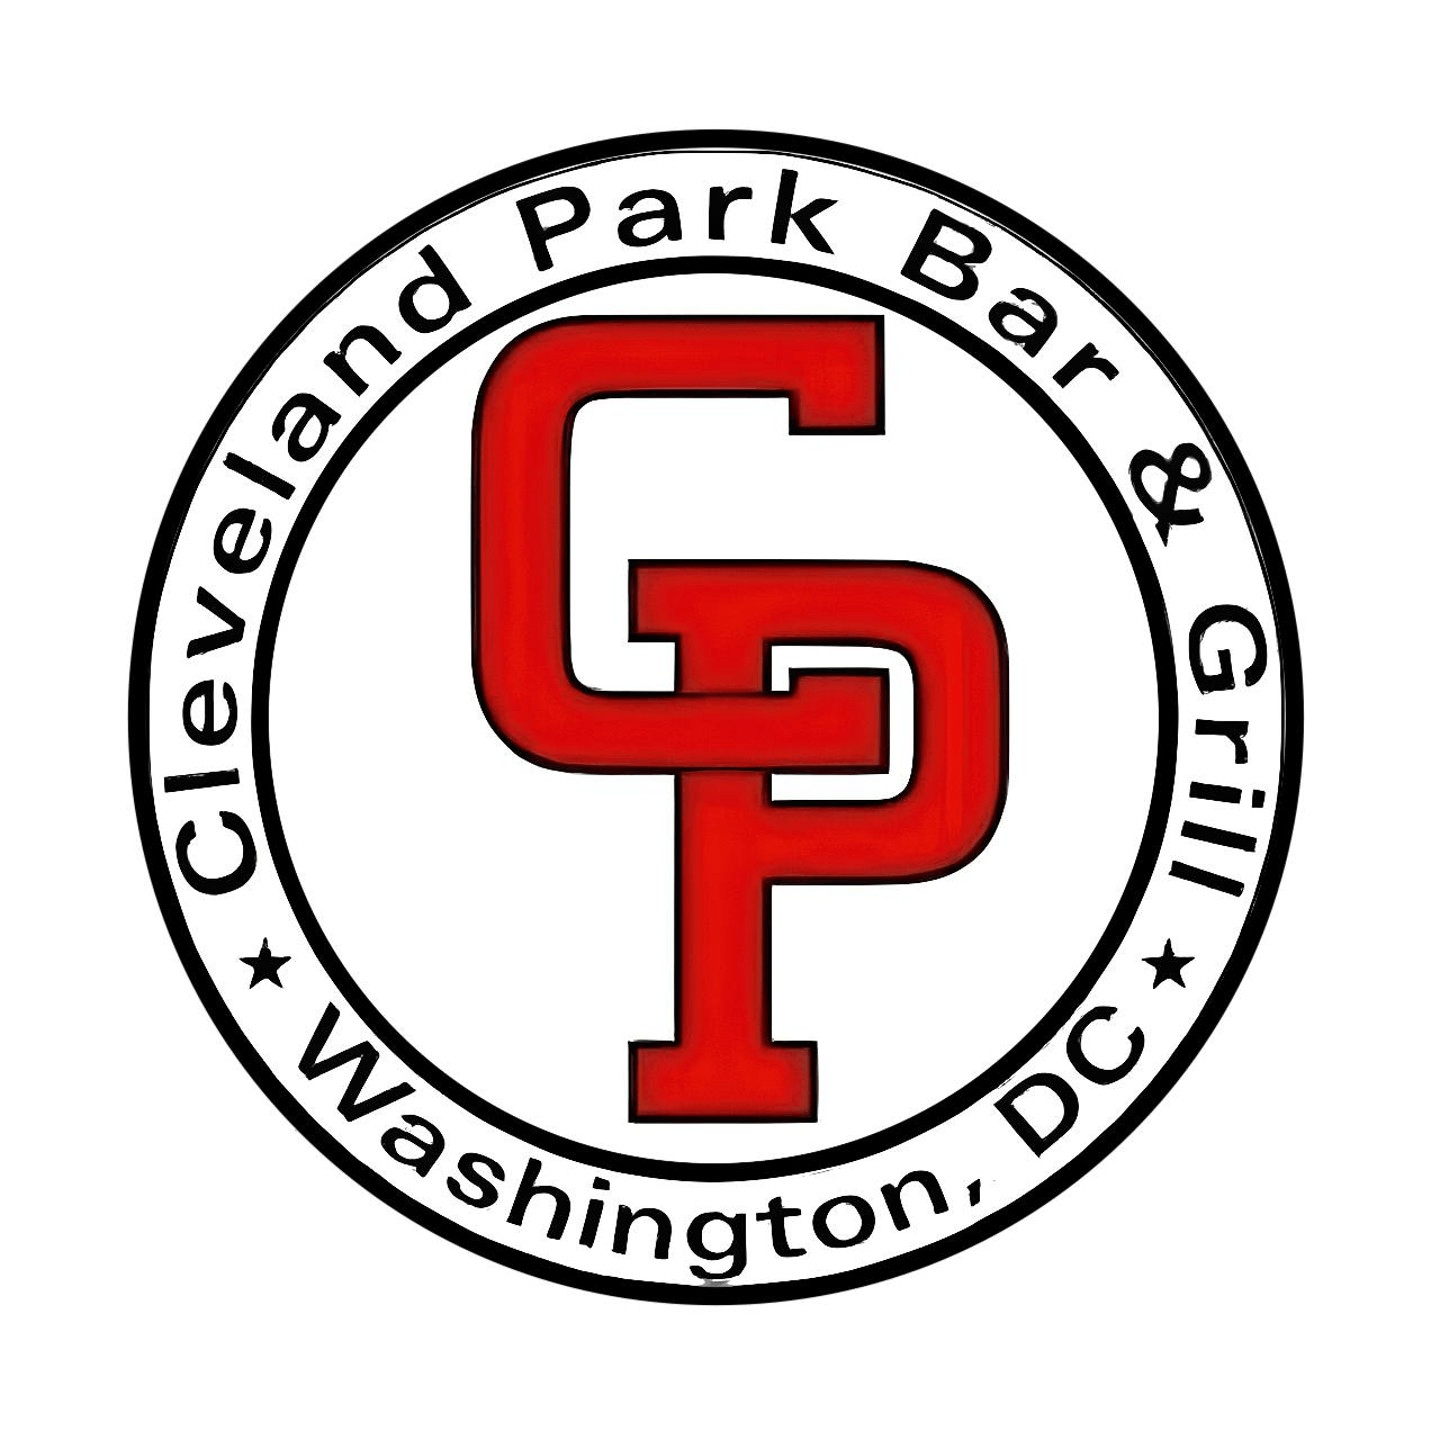 Welcome to Cleveland Park Bar & Grill!